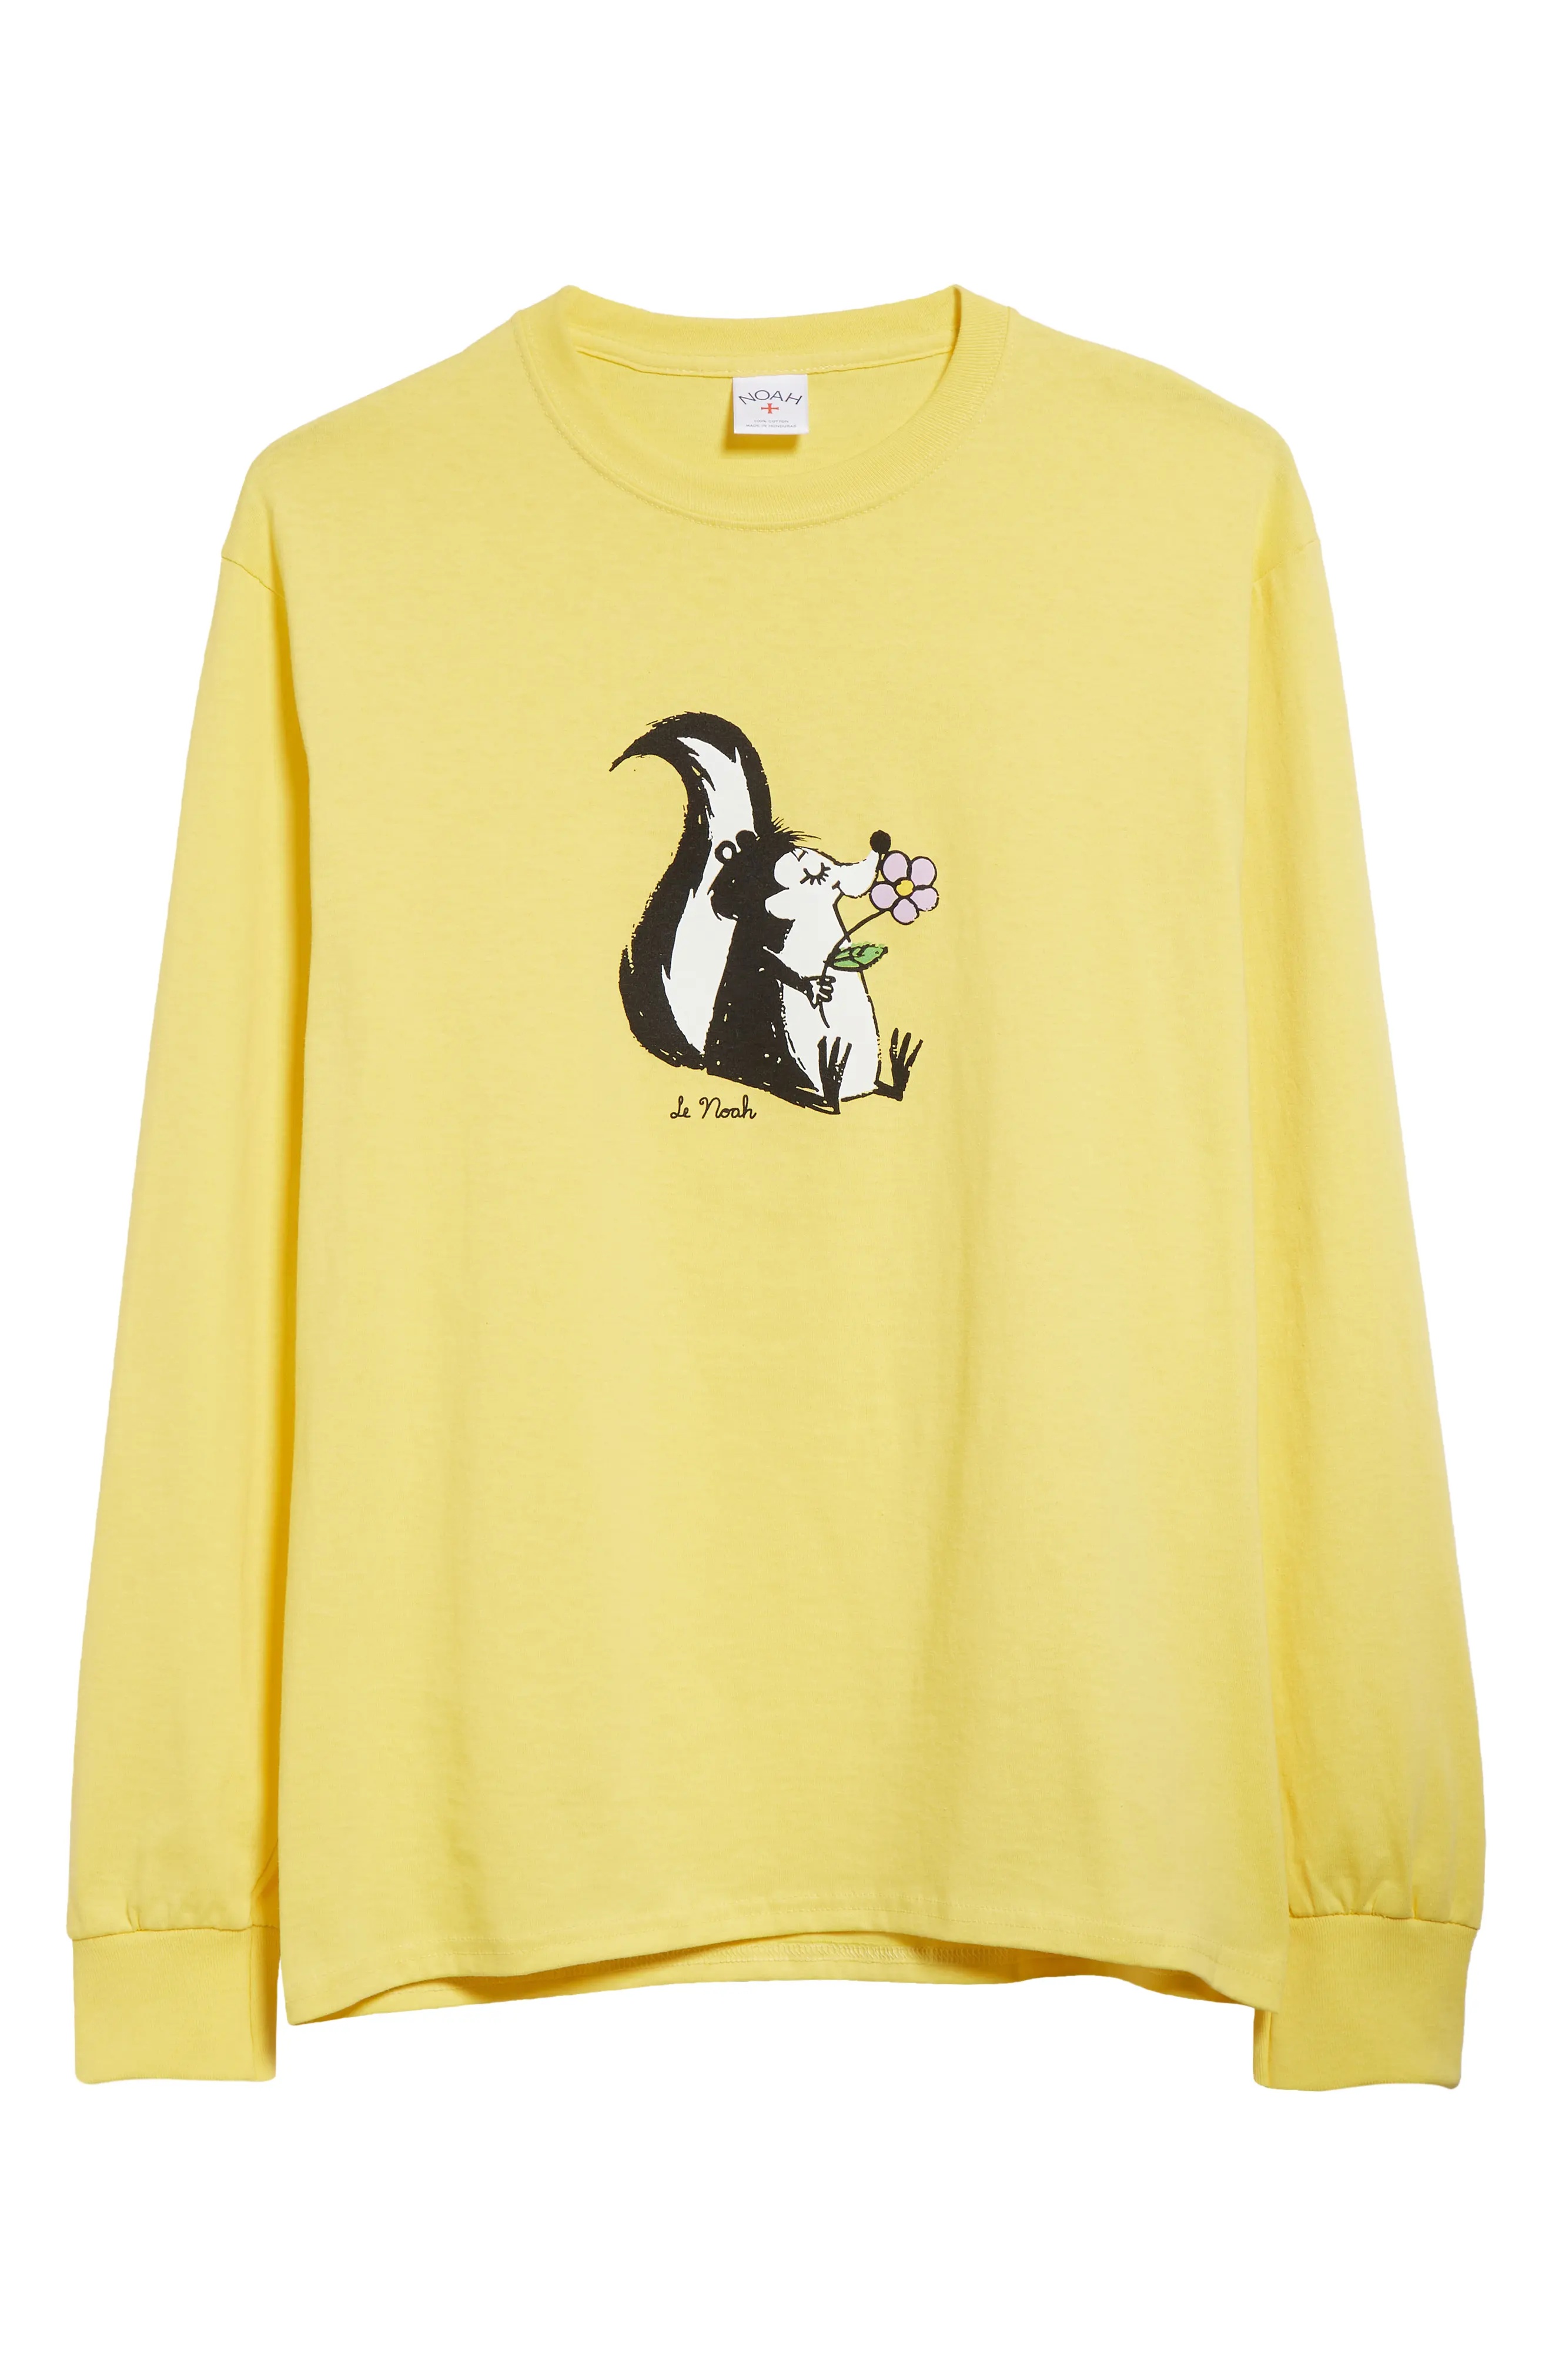 Skunk Long Sleeve Graphic T-Shirt - 6